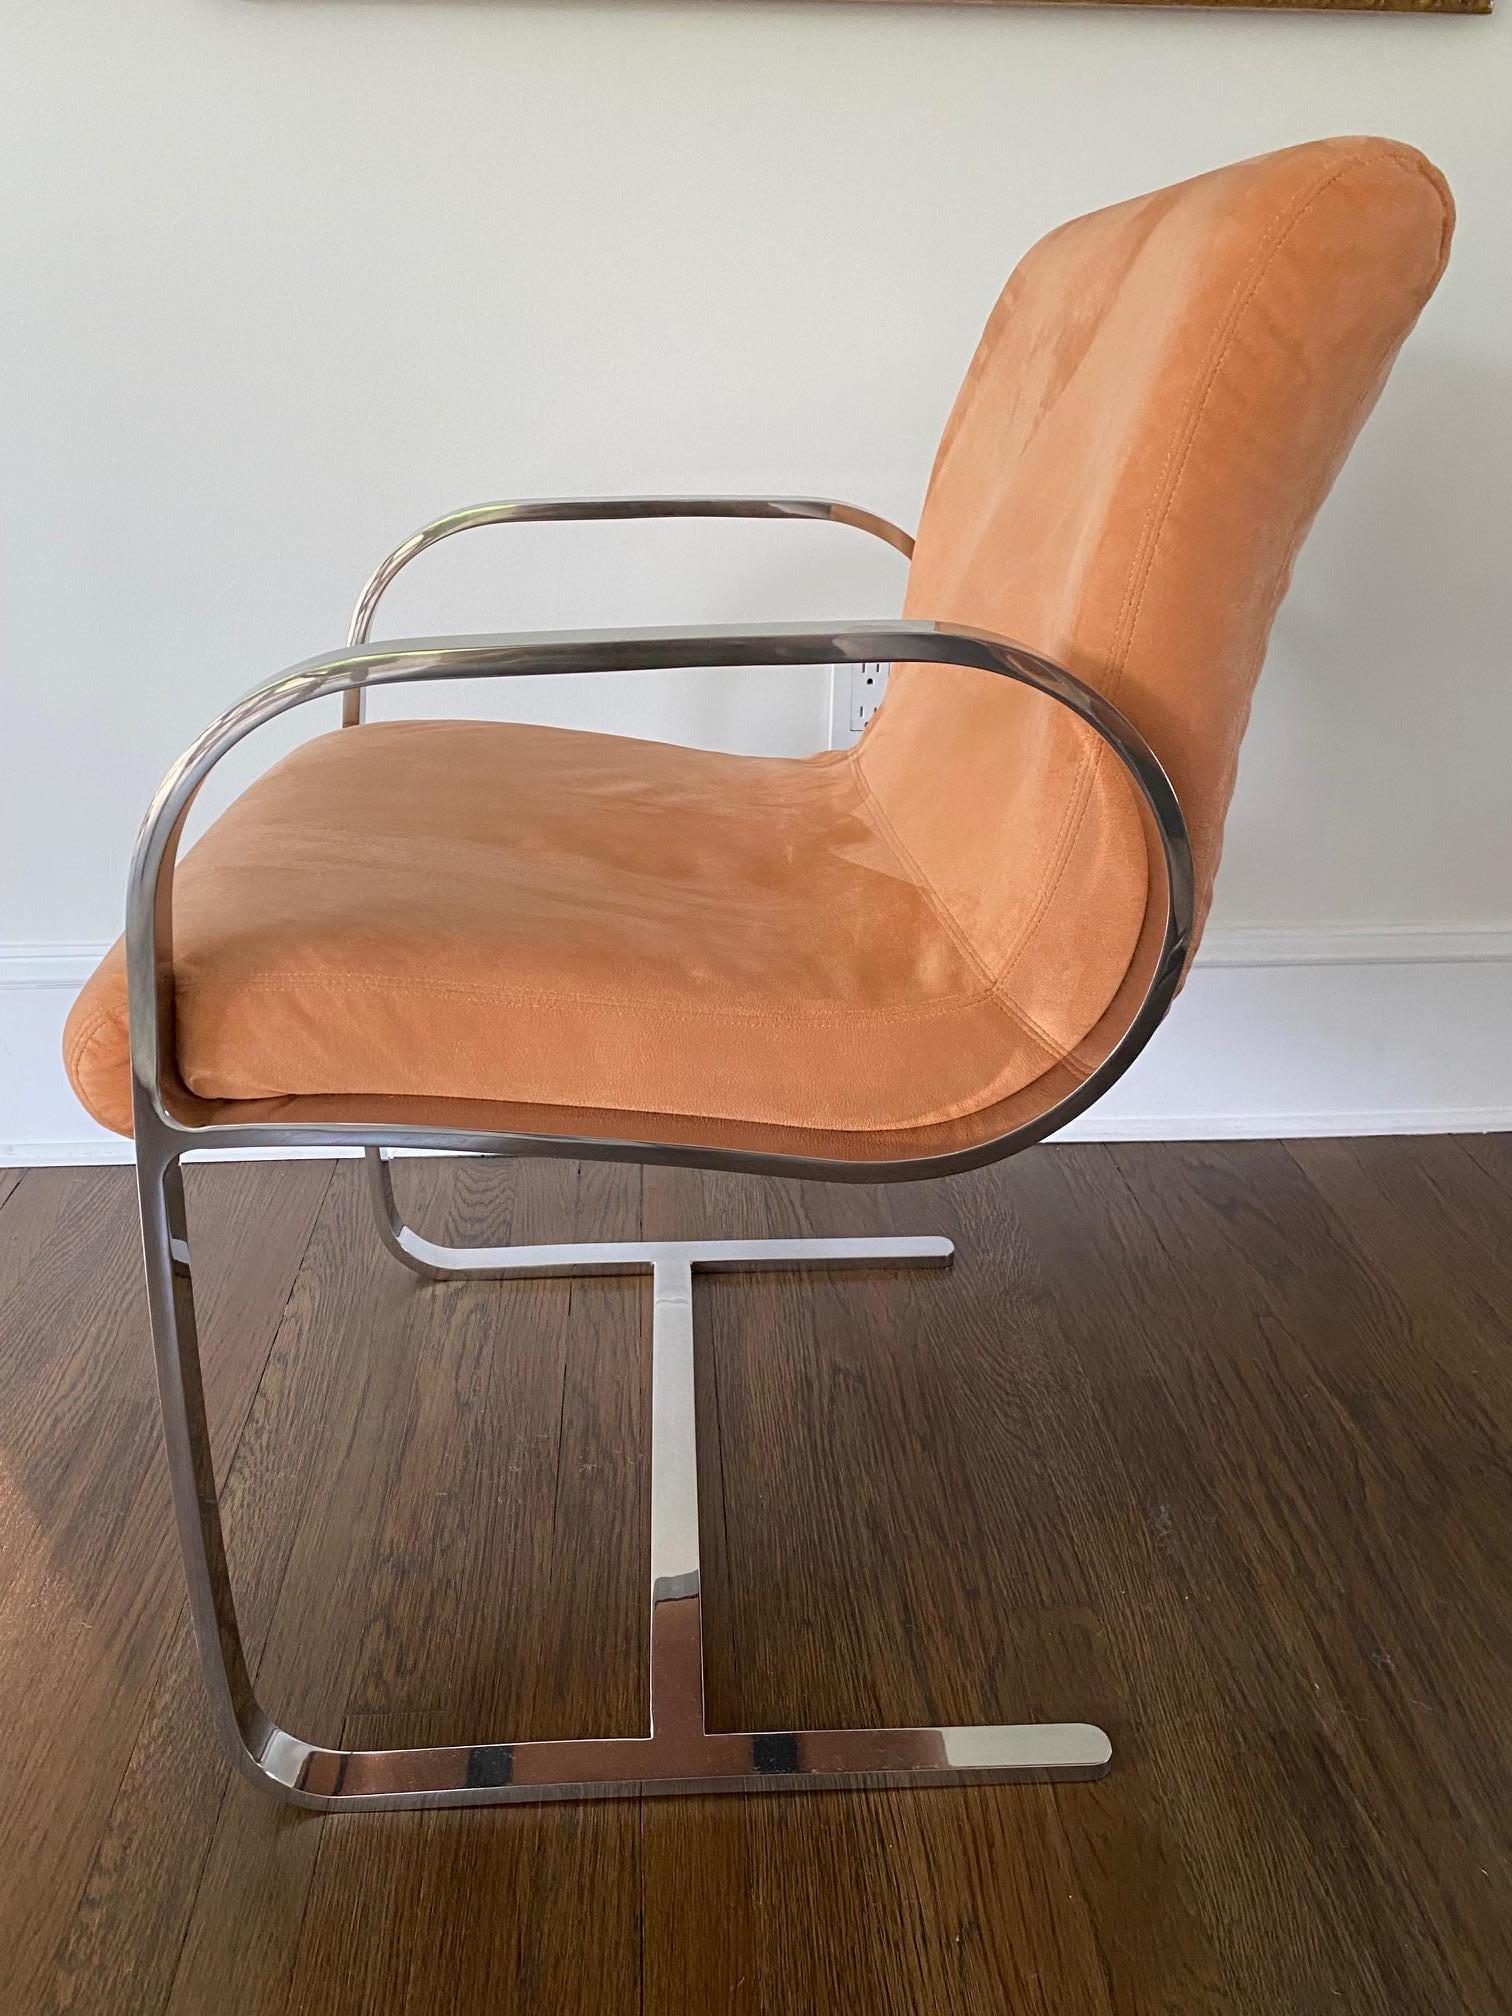 Cool pair of mid century modern Milo Baughman style arm chairs having chrome arms and bases and salmon colored smooth ultrasuede upholstery.

Arm height 25